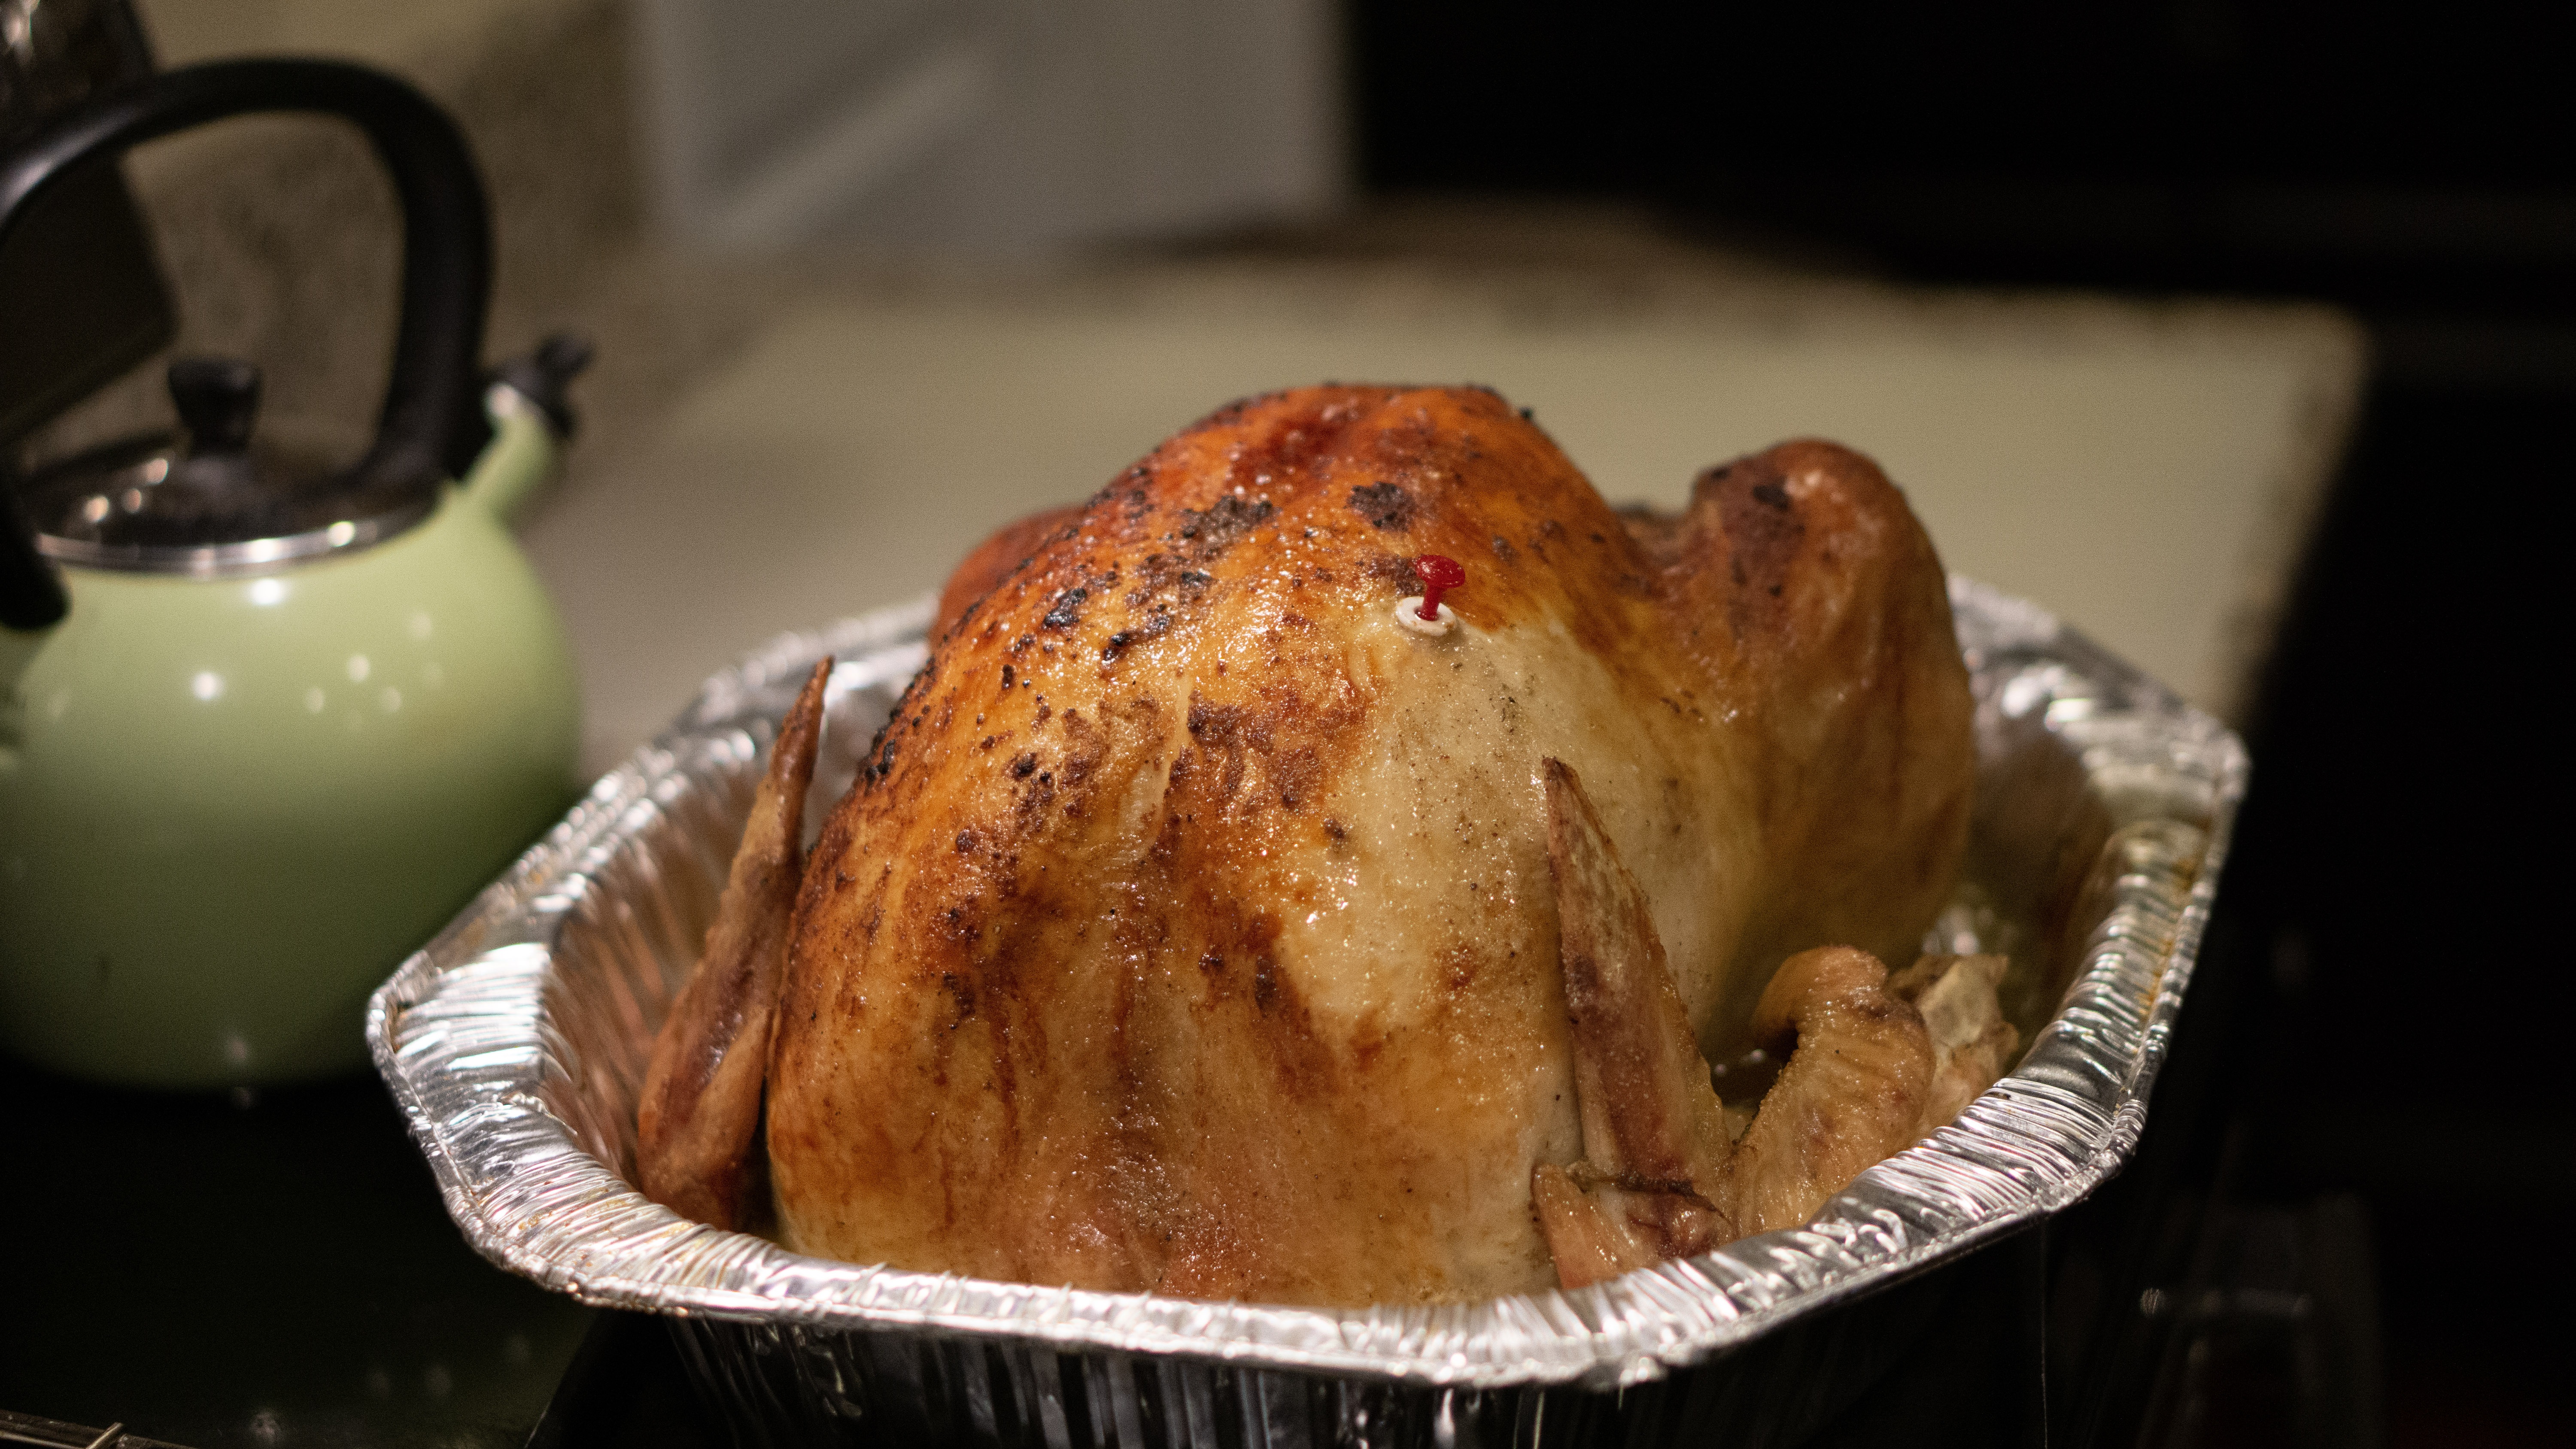 Eating rare poultry never is advised, so make sure it is cooked to the proper temperature. (Photo courtesy of Pixabay)